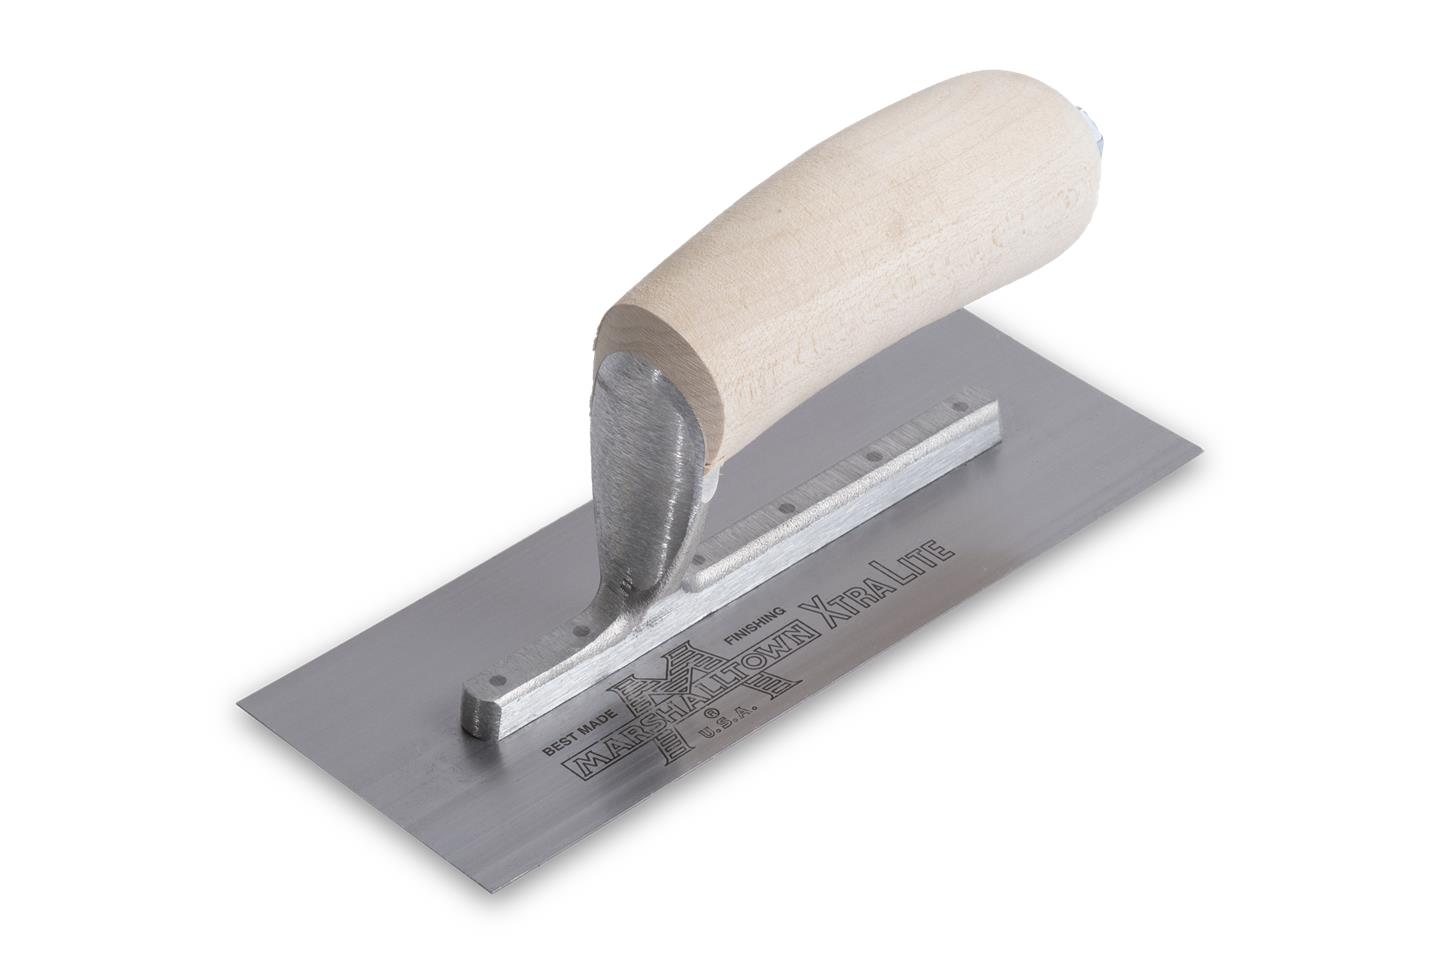 Marshalltown 8in x 3in Mini Trowel - Utility and Pocket Knives